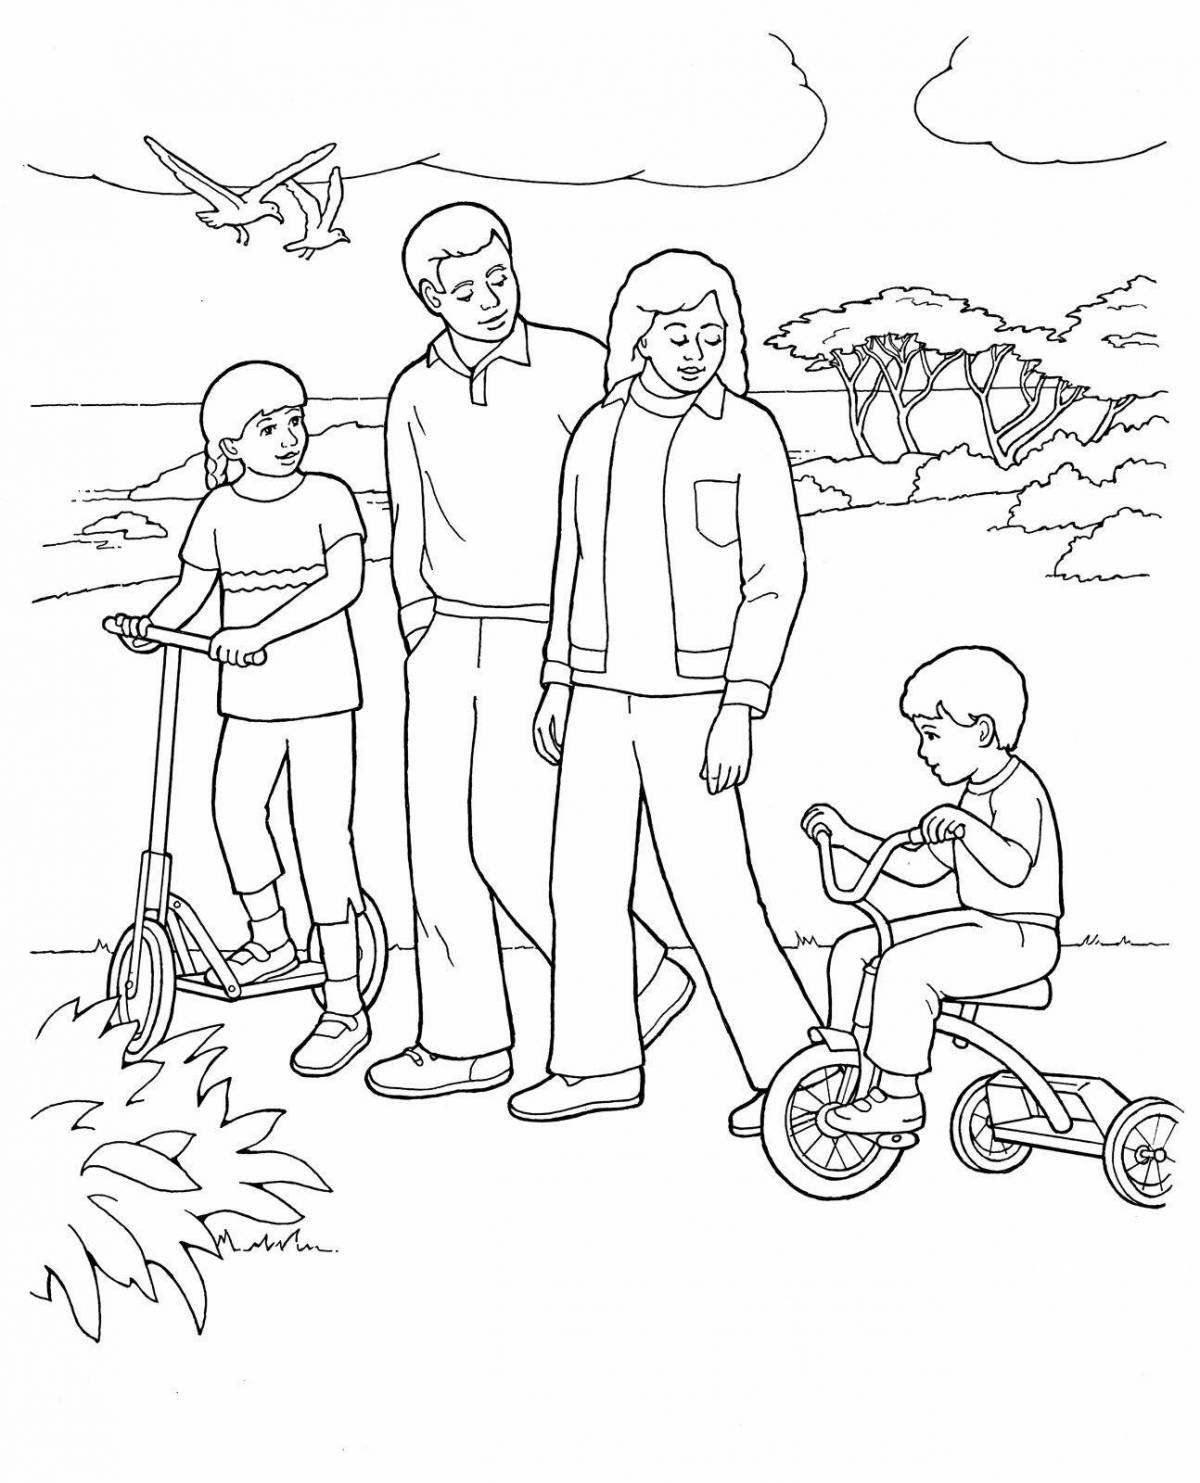 Coloring pages for dad and daughter